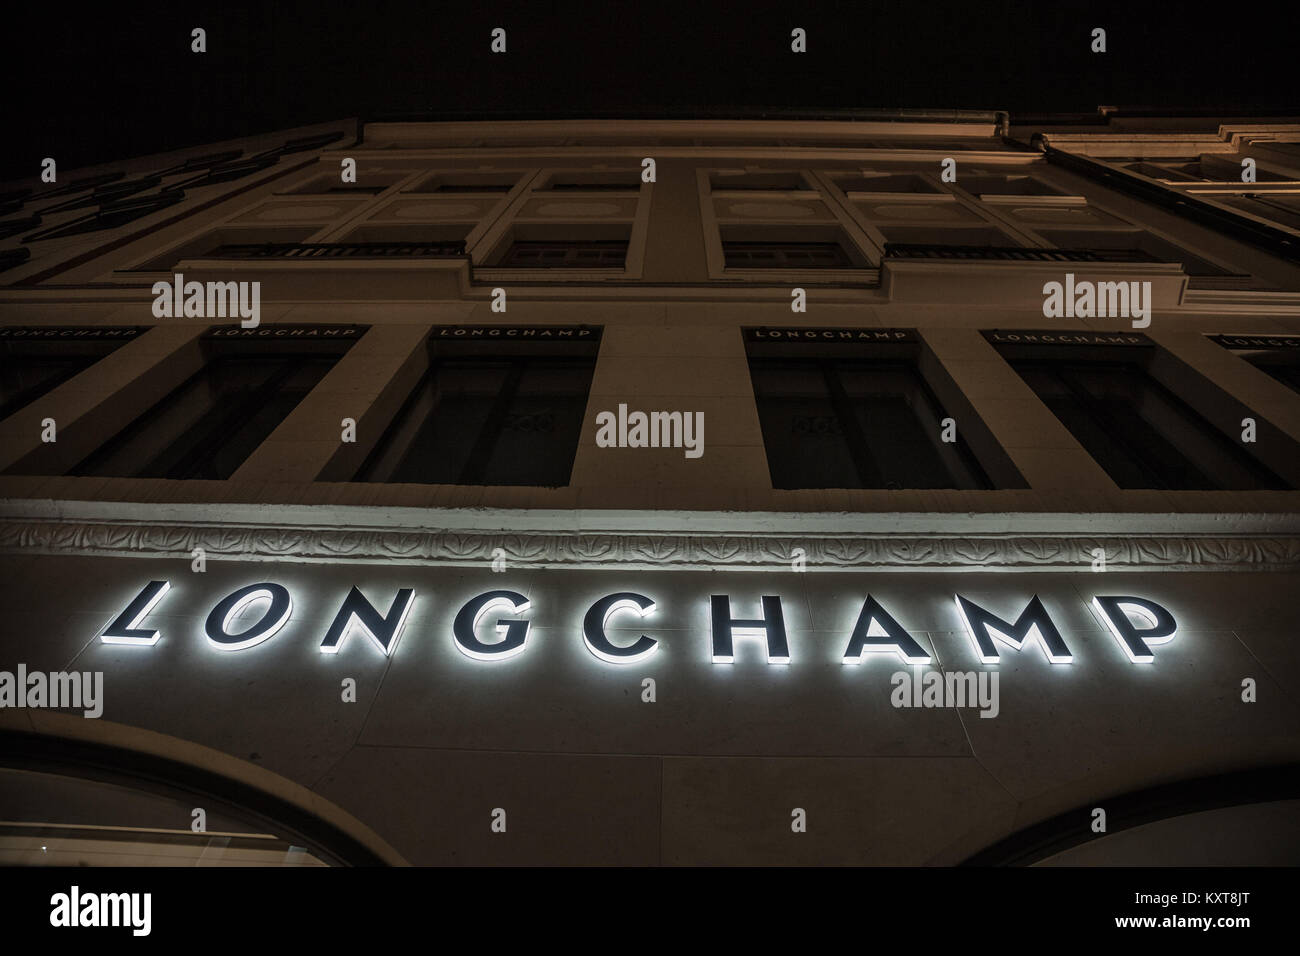 MUNICH, GERMANY - DECEMBER 17, 2017: Longchamp logo on their Munich main shop taken at night. Longchamp is a French luxury leather goods company, foun Stock Photo